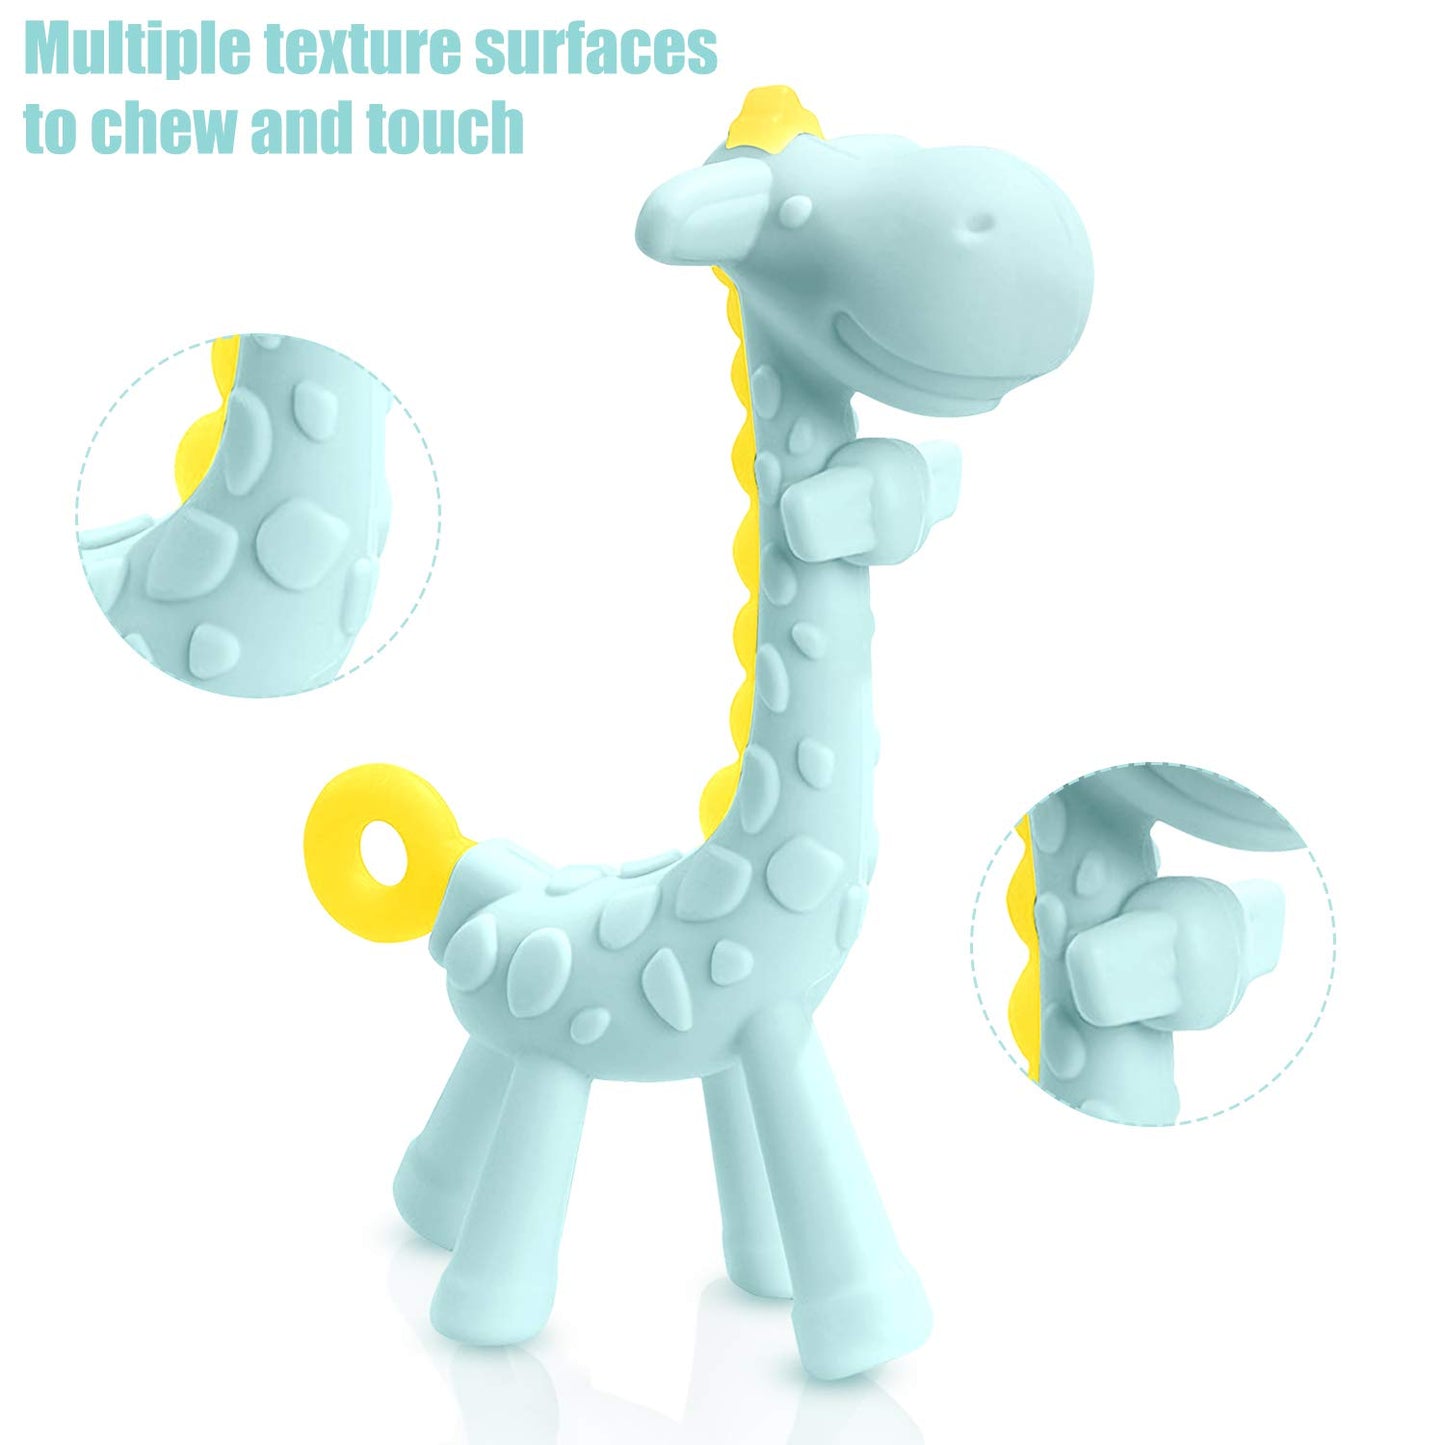 SHARE&CARE BPA Free Silicone Giraffe Baby Teether Toy with Storage Case, for 3 Months Above Infant Sore Gums Pain Relief and Baby Shower, Baby Teething Toys (Blue)